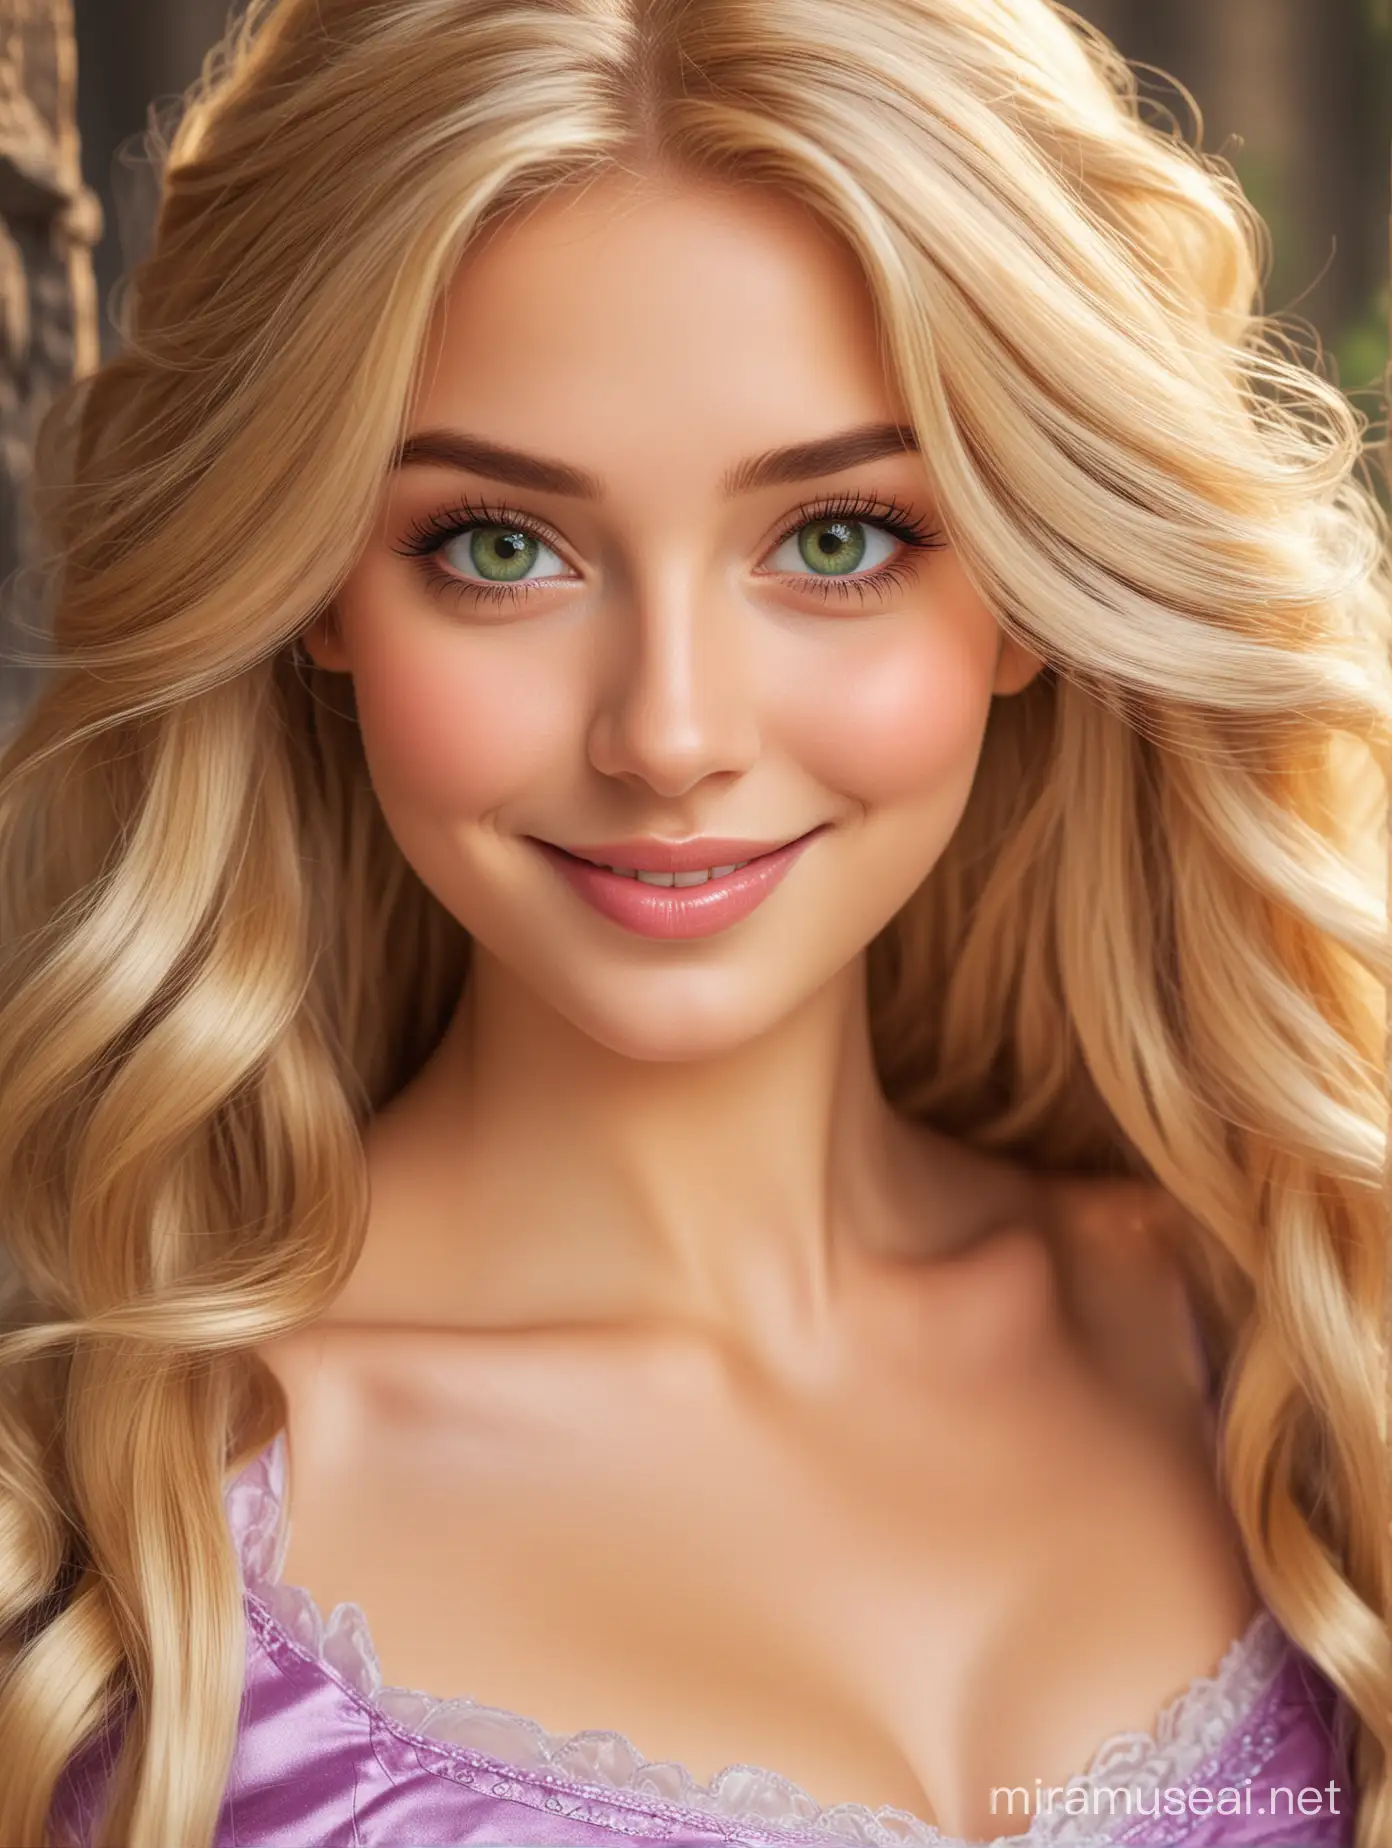 Gorgeous princess rapunzel smiling with blonde hair and green eyes. Looking at you 